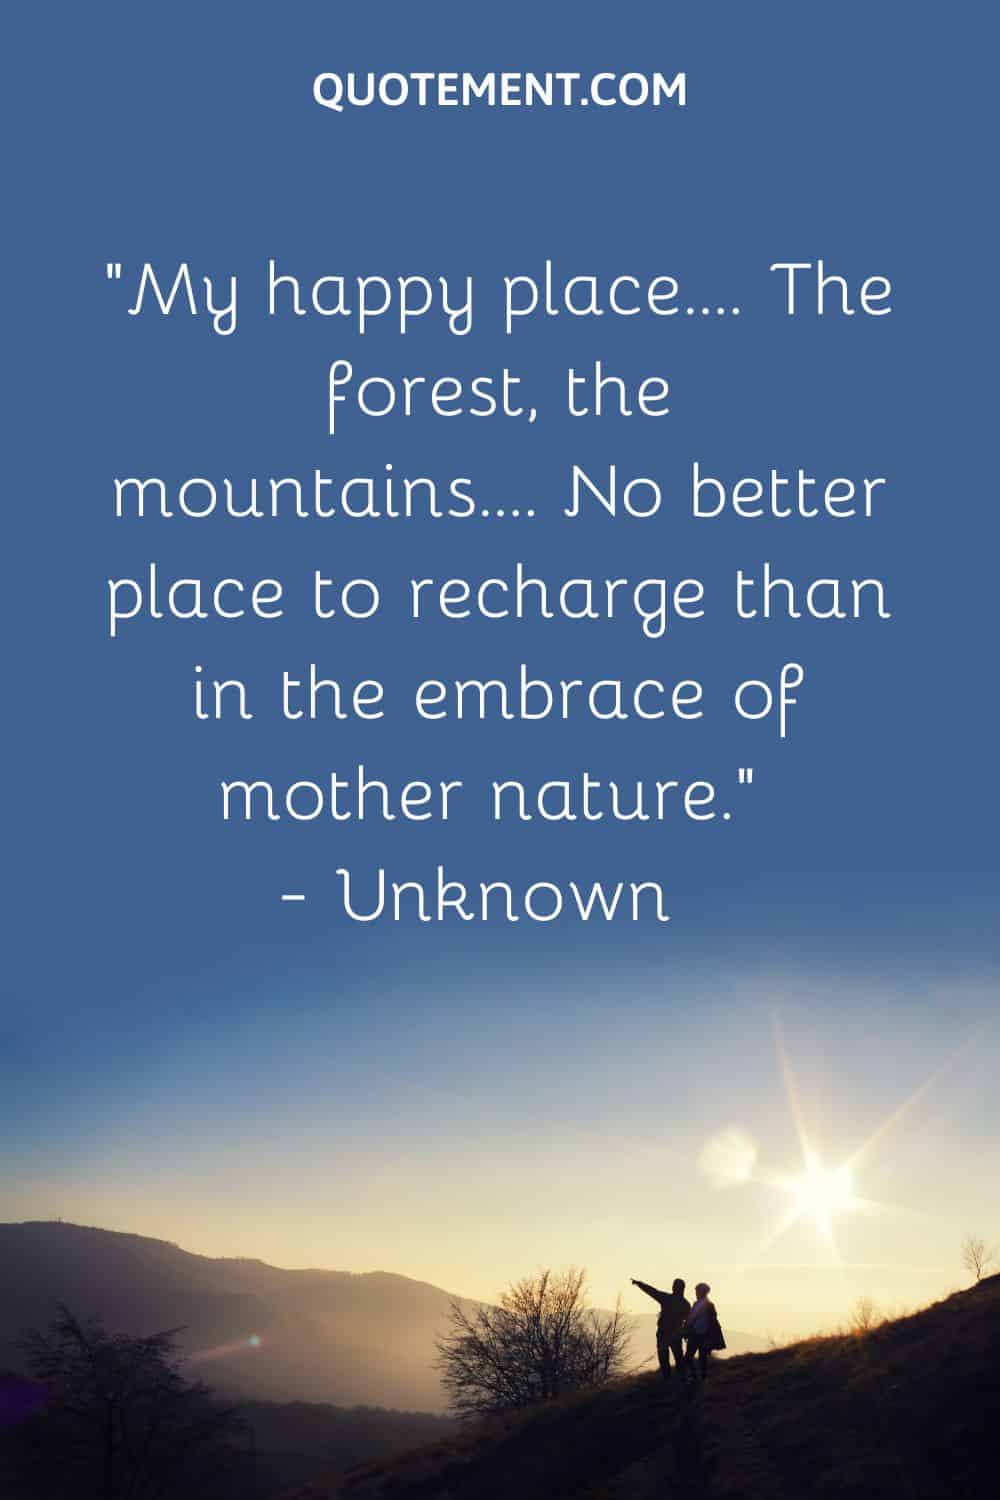 “My happy place…. The forest, the mountains…. No better place to recharge than in the embrace of mother nature.” — Unknown